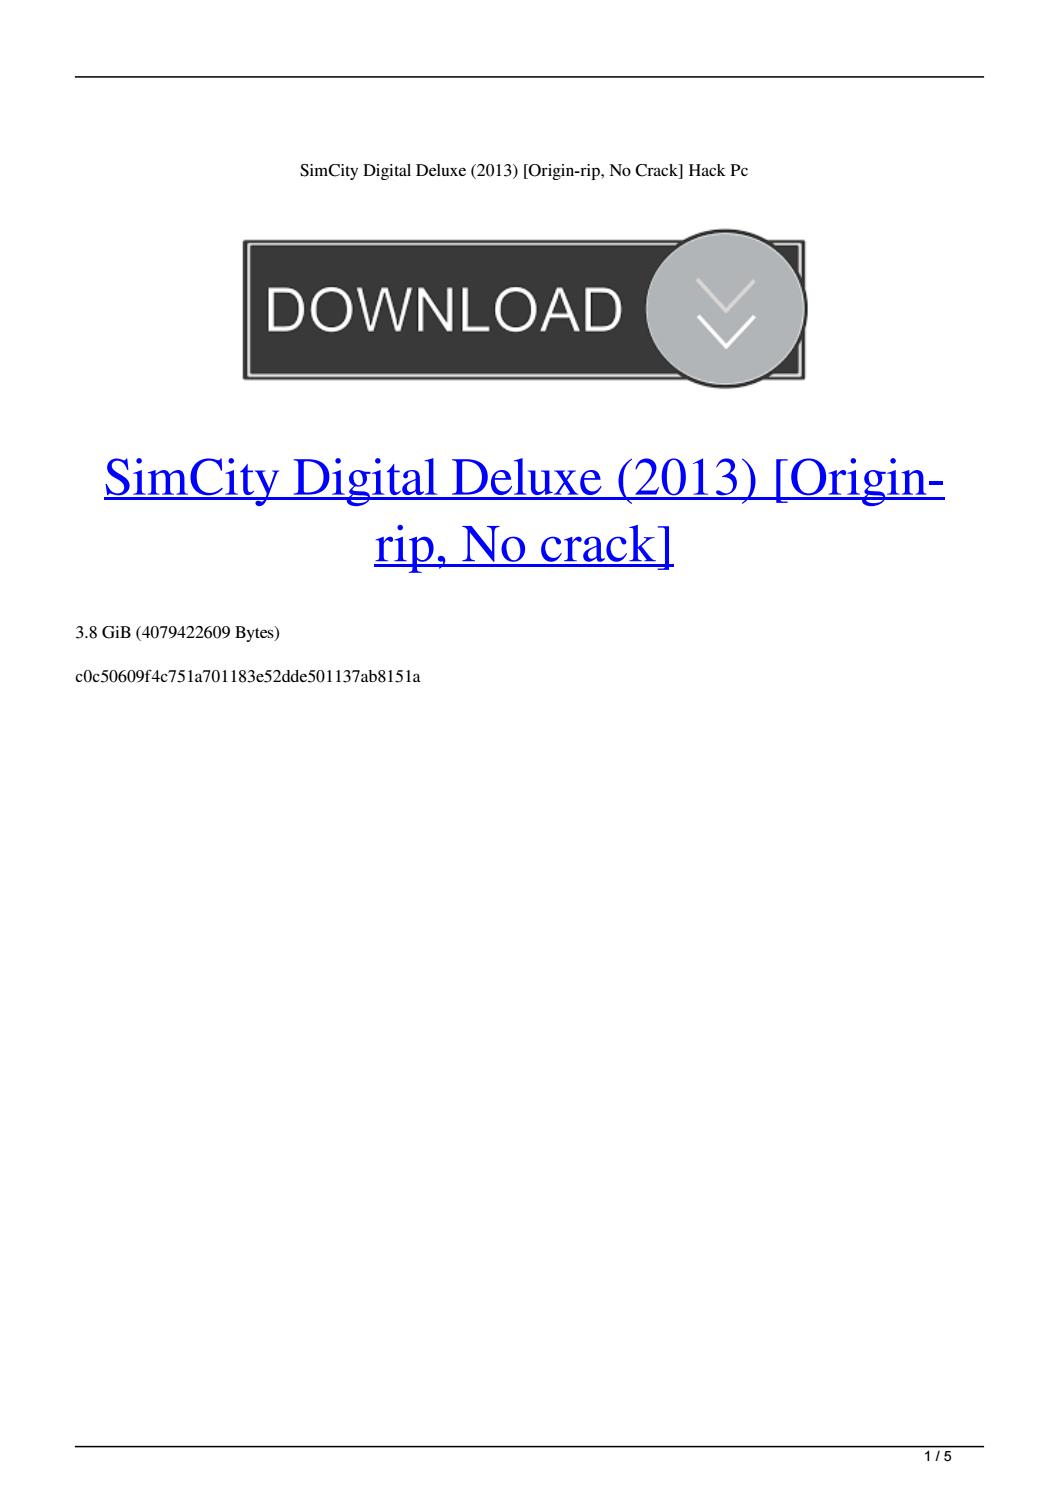 free simcity 5 activation code